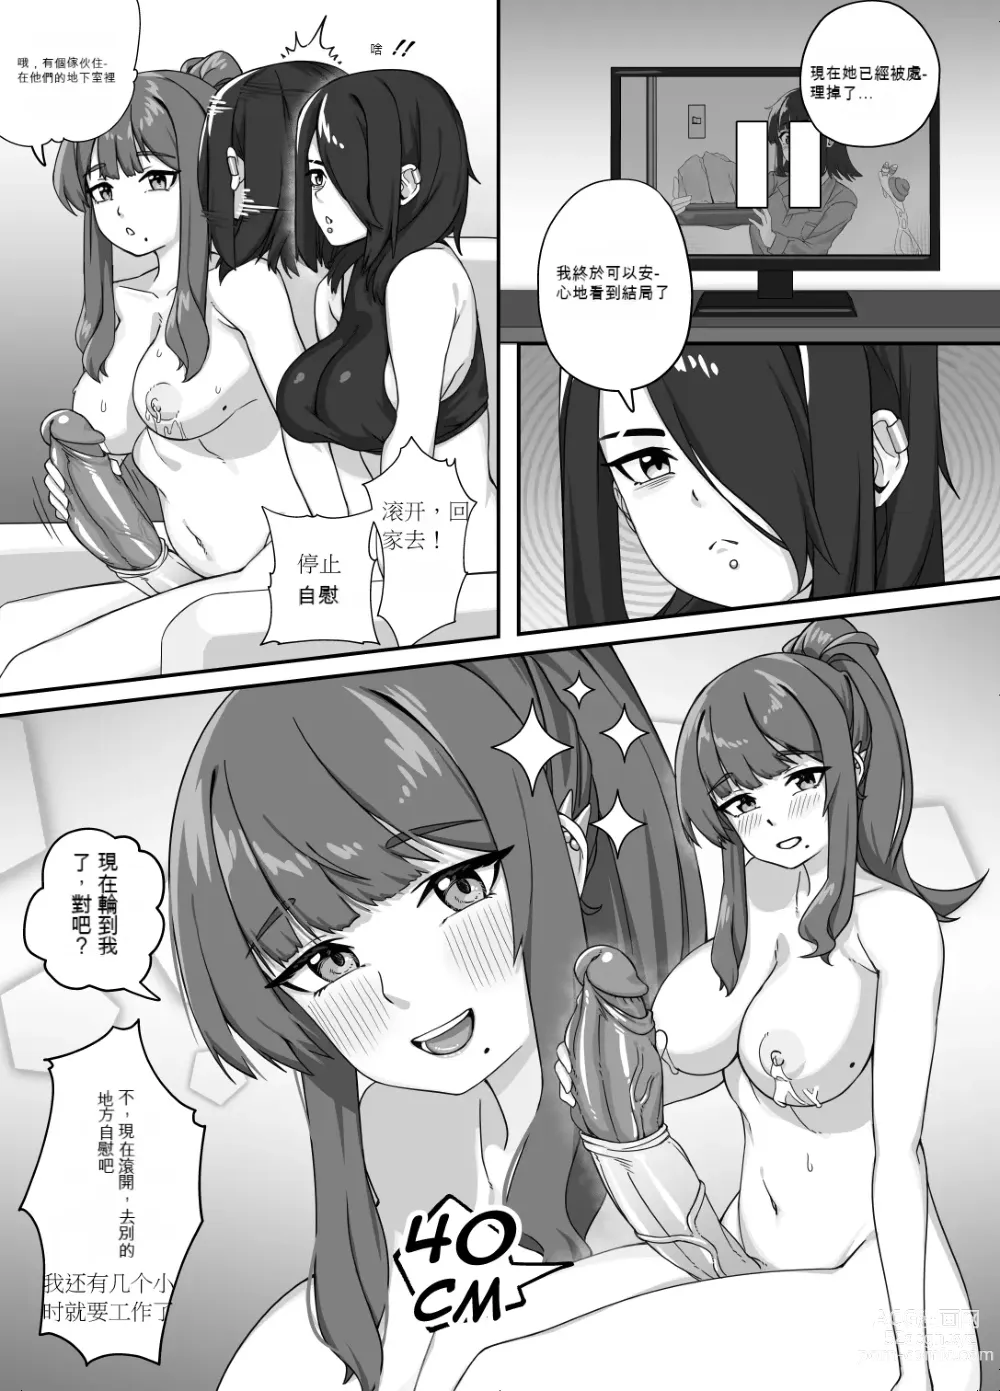 Page 30 of doujinshi Masturbation with a Giant Dick, Lets have fun!